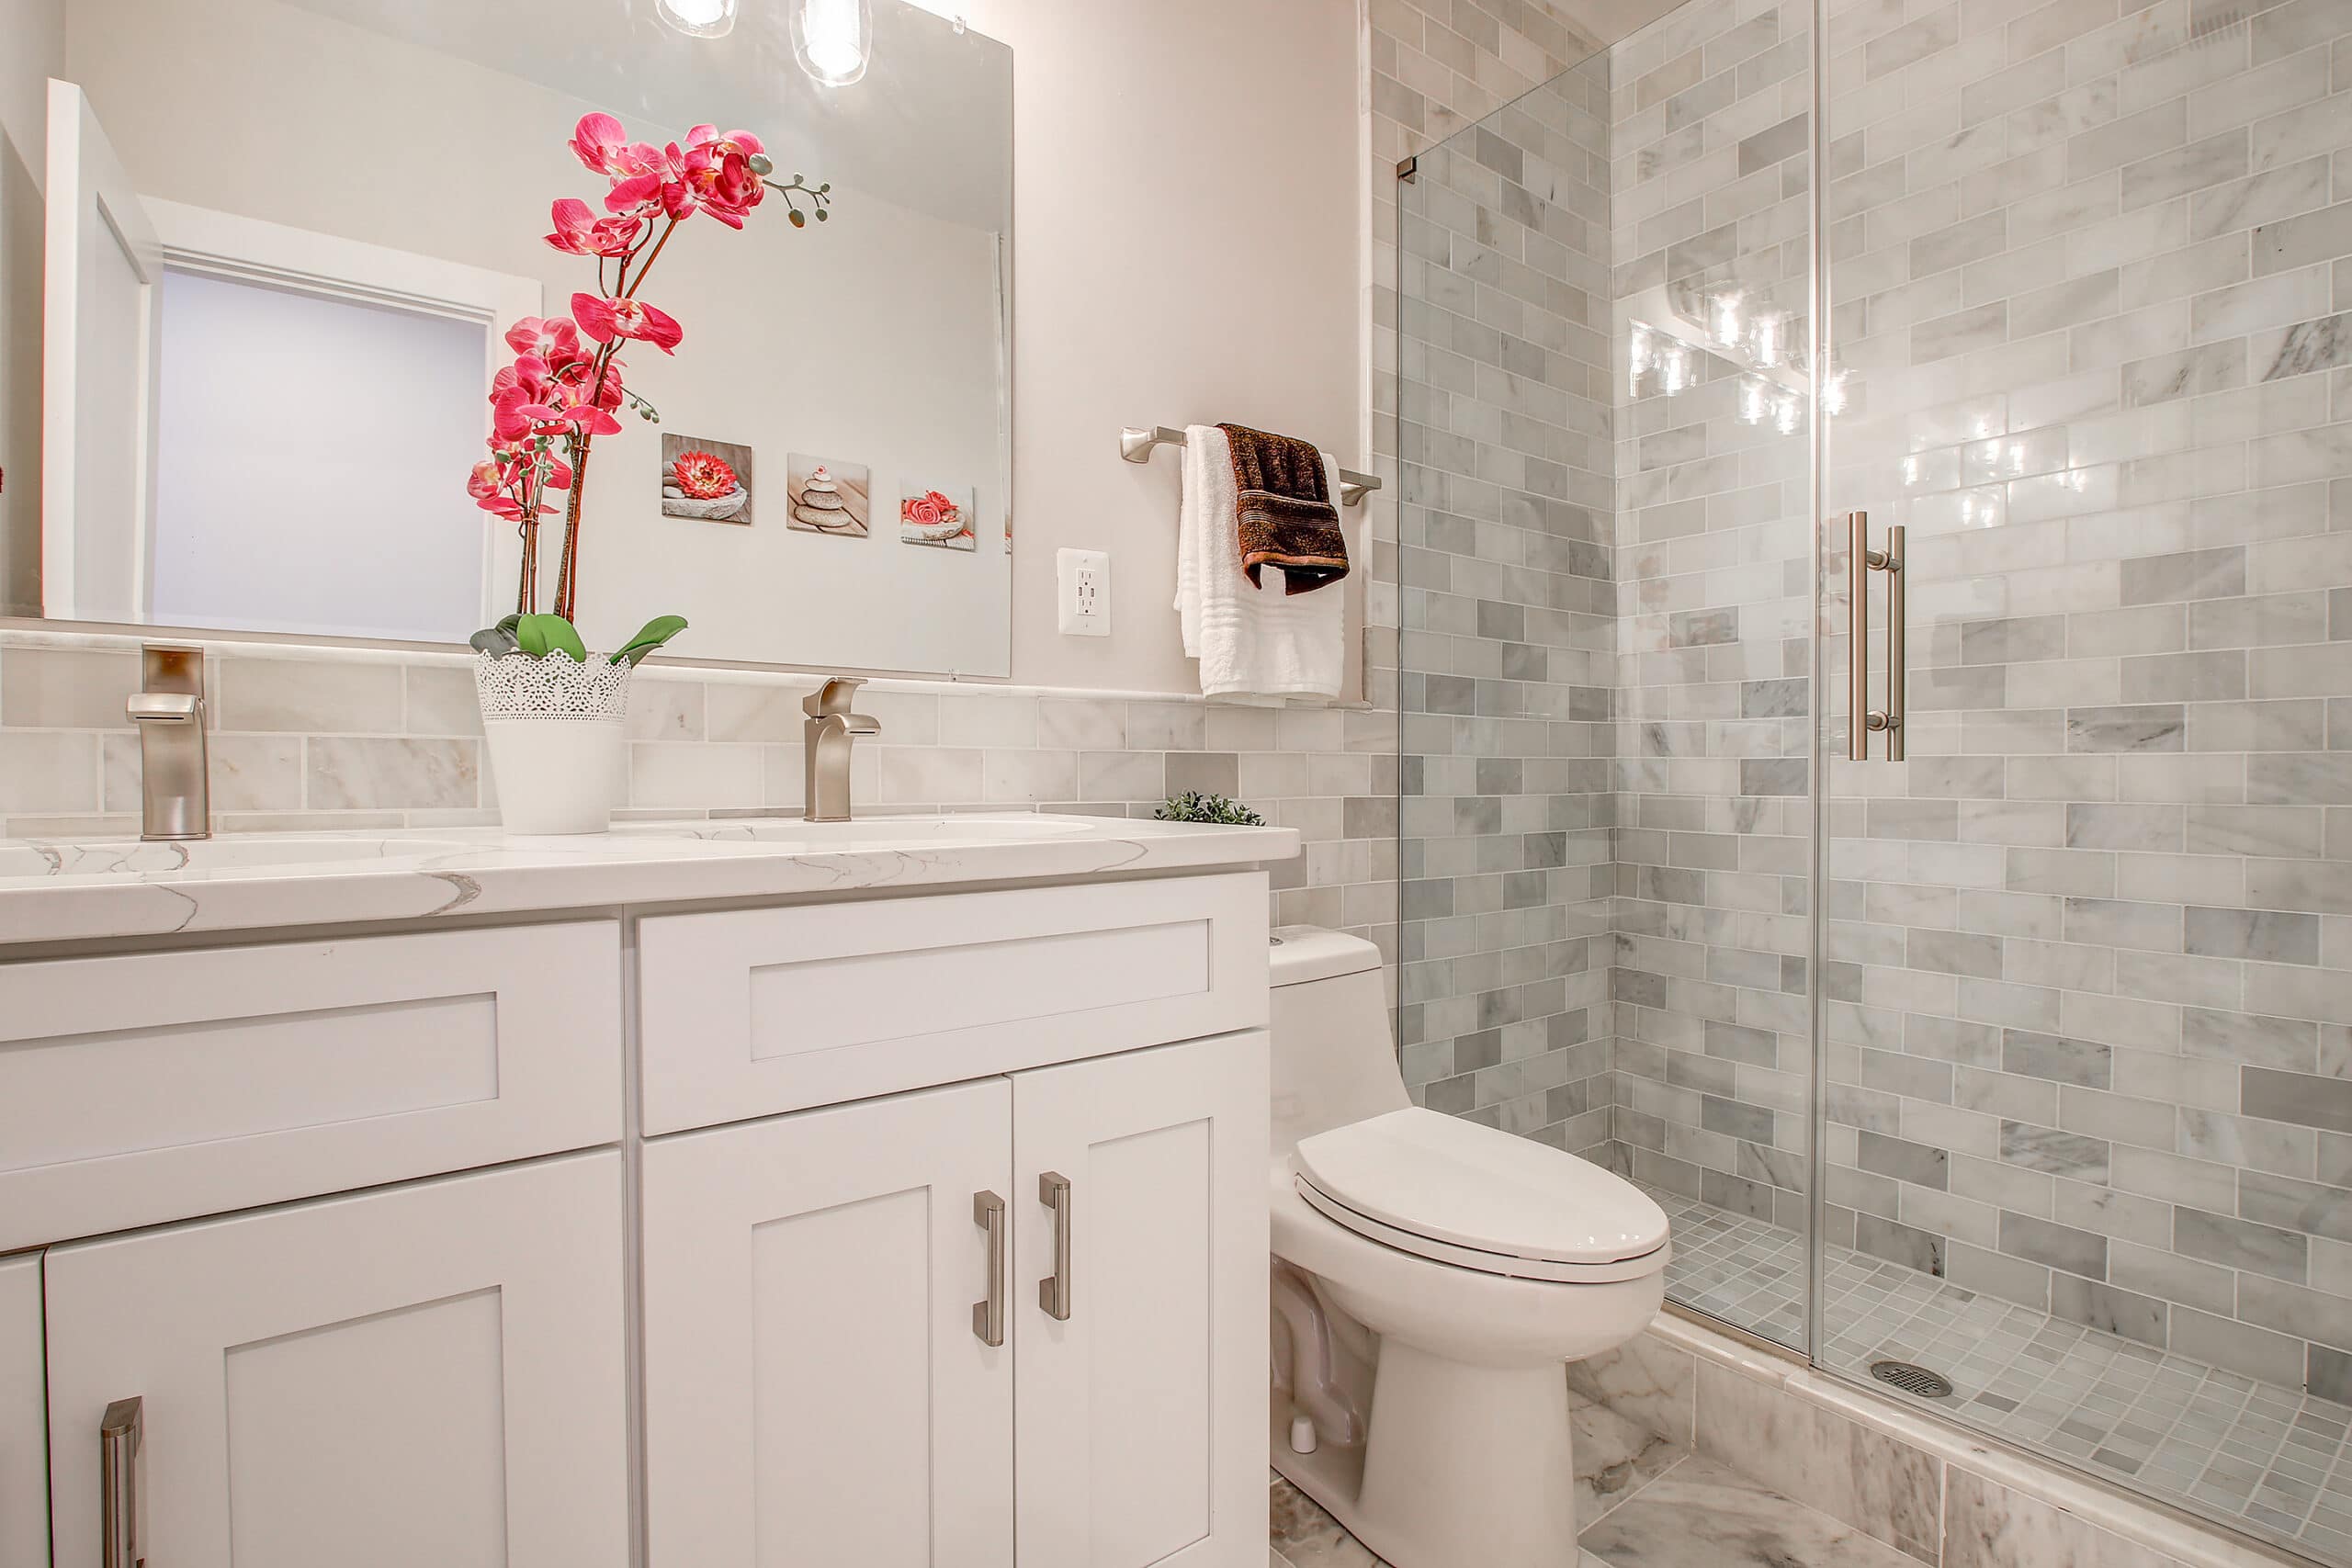 Bathroom Remodeling Process Everything, How To Remodel A Bathtub